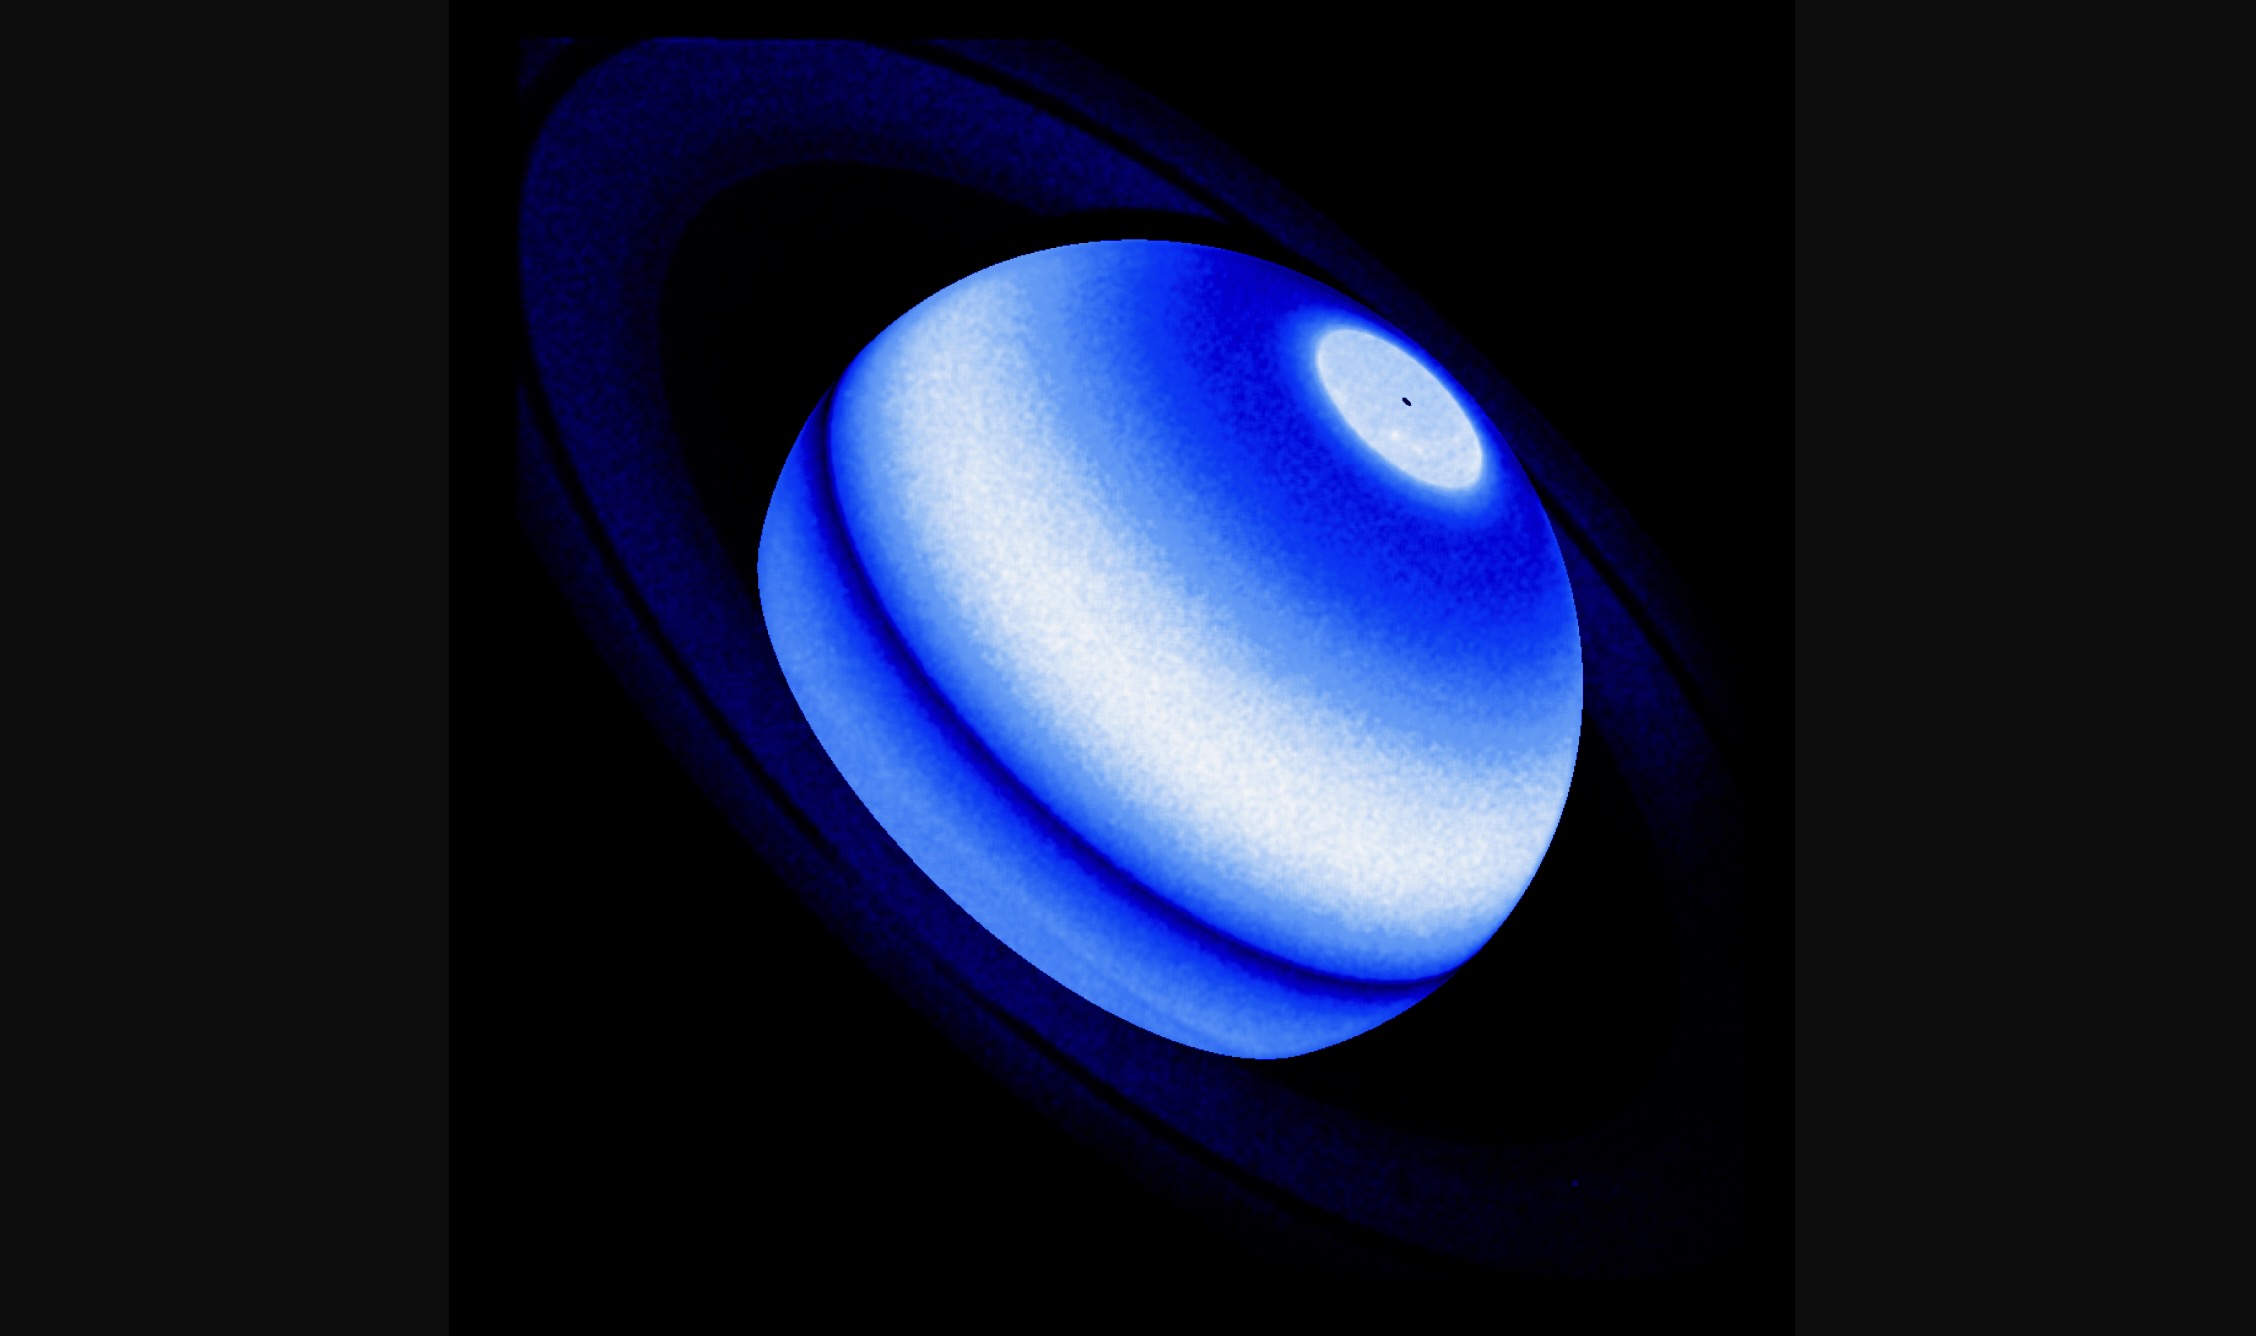 This composite image shows the Saturn Lyman-alpha bulge, an emission from hydrogen which is a persistent and unexpected excess detected by three distinct NASA missions, namely Voyager 1, Cassini, and the Hubble Space Telescope between 1980 and 2017.